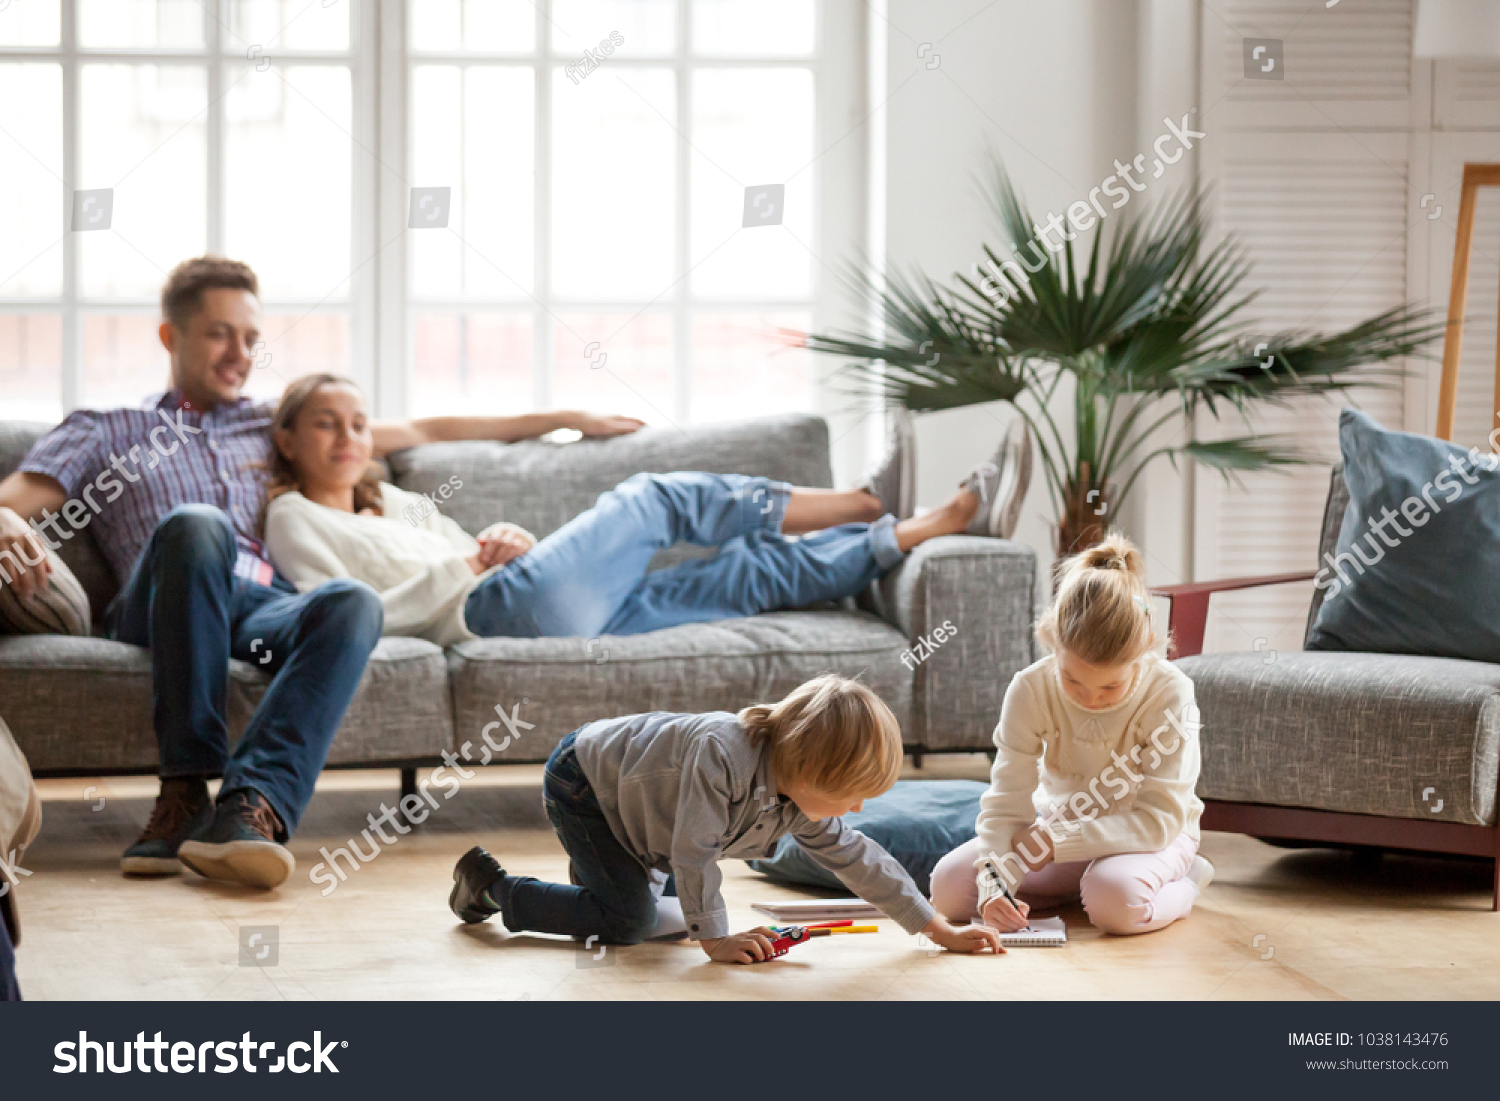 Children sister and brother playing drawing together on floor while young parents relaxing at home on sofa, little boy girl having fun, friendship between siblings, family leisure time in living room #1038143476